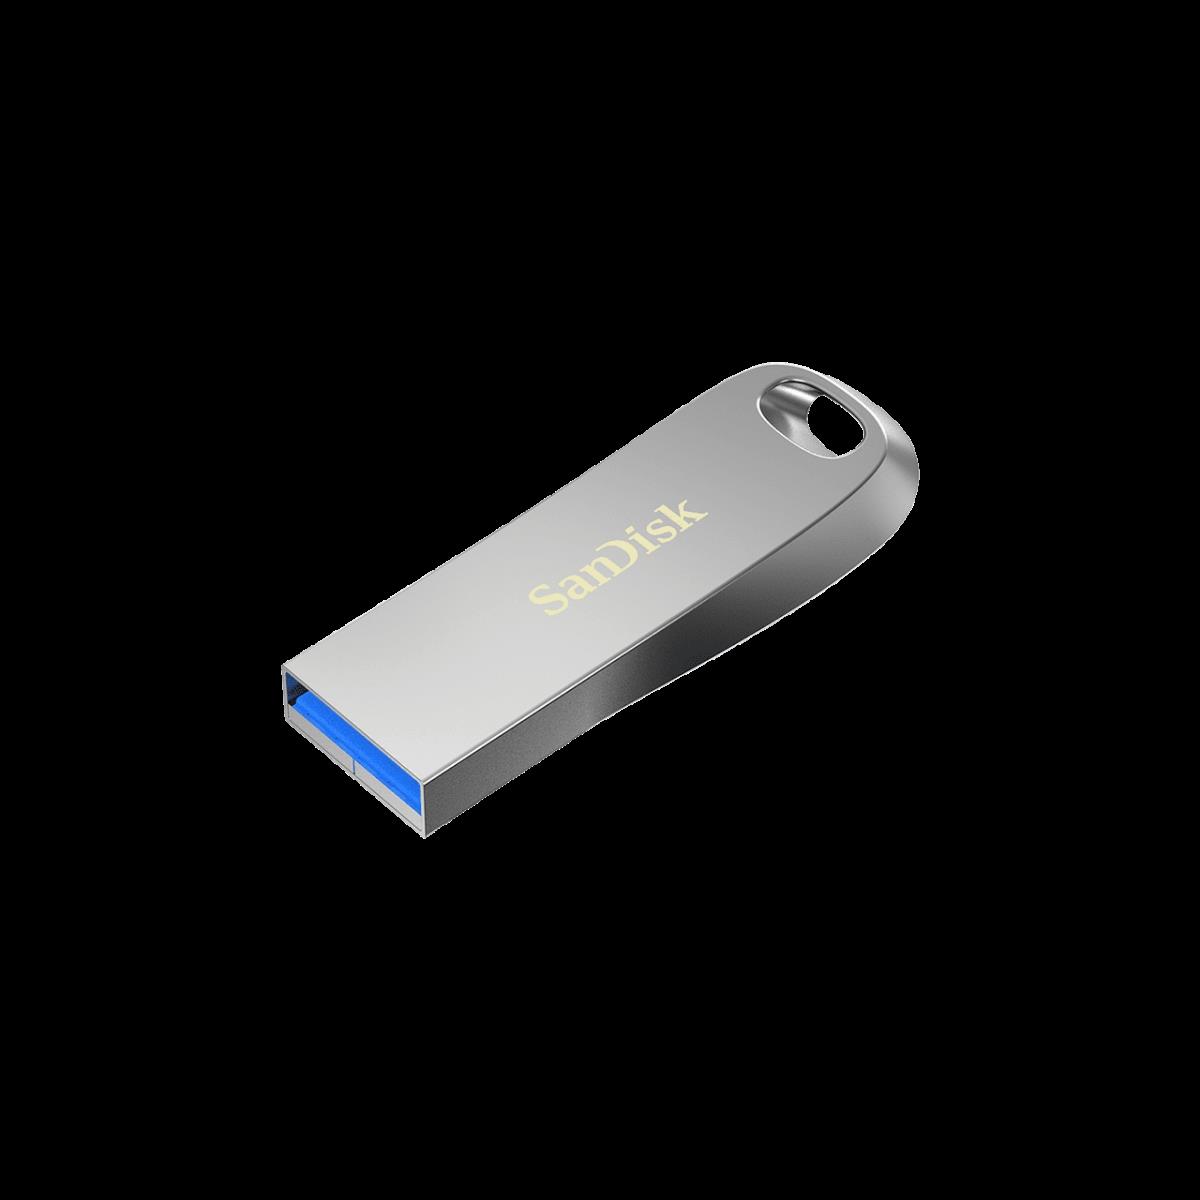 Picture of Sandisk SDCZ74-064G-A46 64GB Ultra Luxe USB 3.1 Flash Drive Type A, Metal